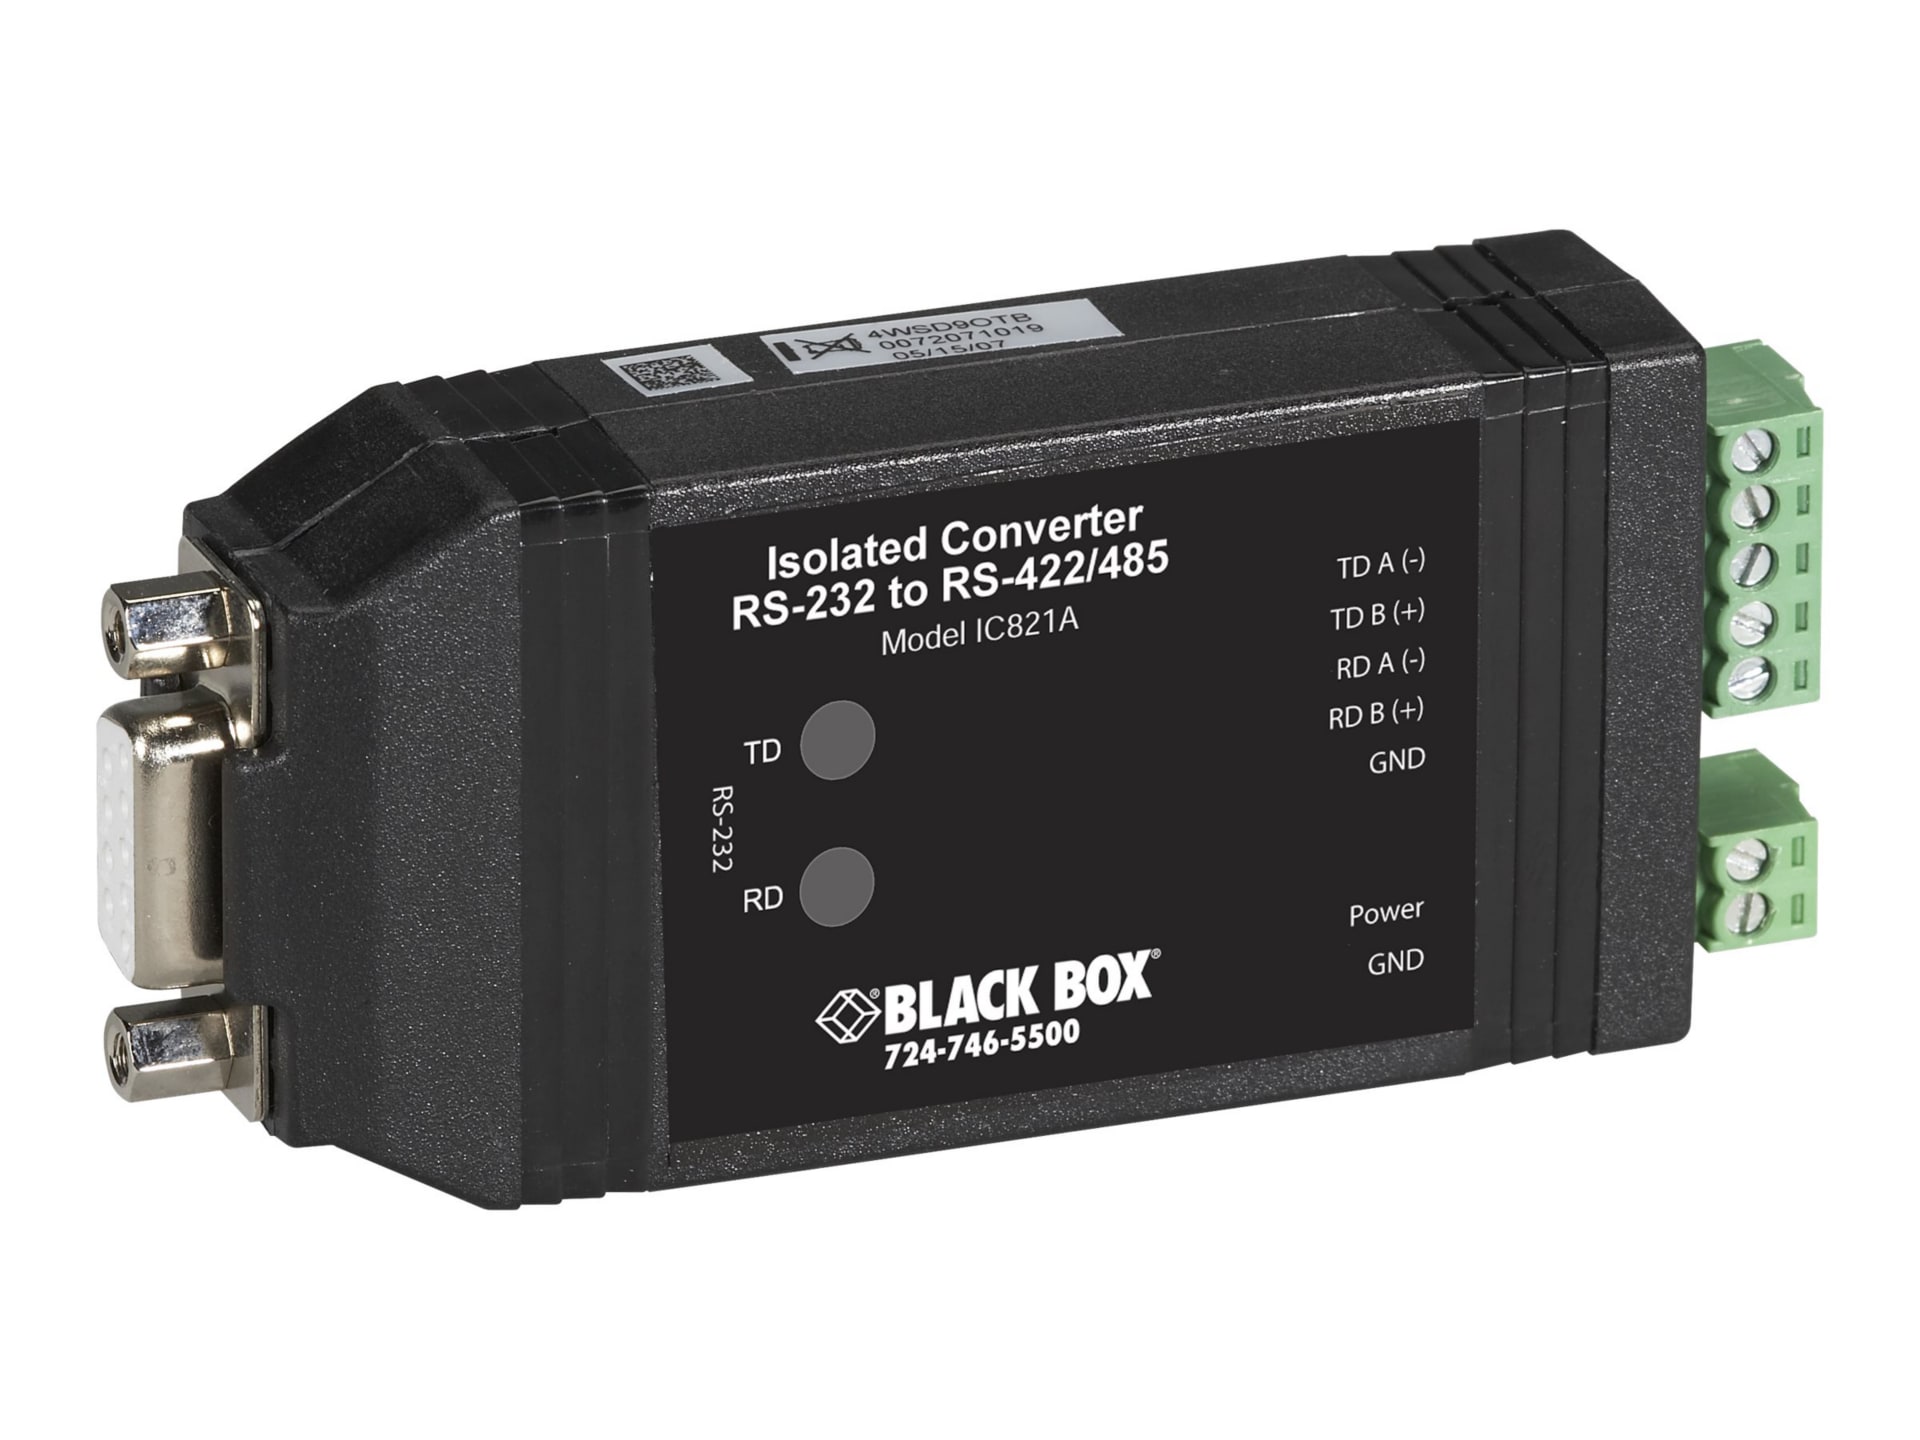 Black Box Universal RS-232<->RS-422/485 Converter with Opto-Isolation - serial adapter - RS-232 - RS-422/485